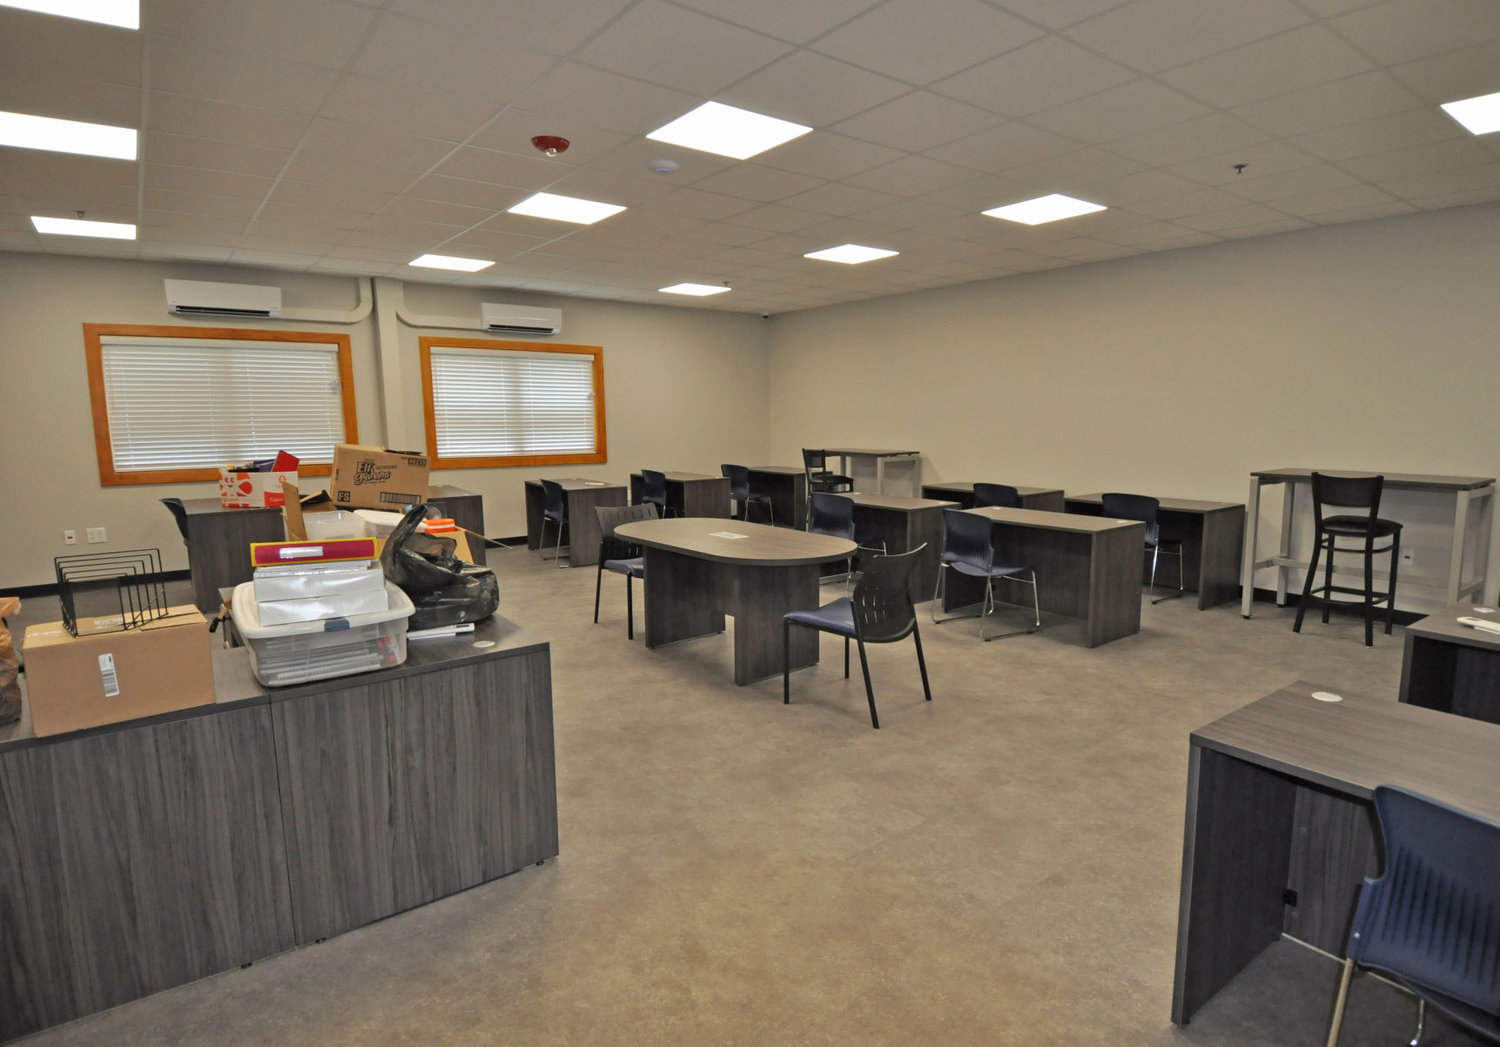 The room for alternative school allows more room for students, and each work station will have its own computer.